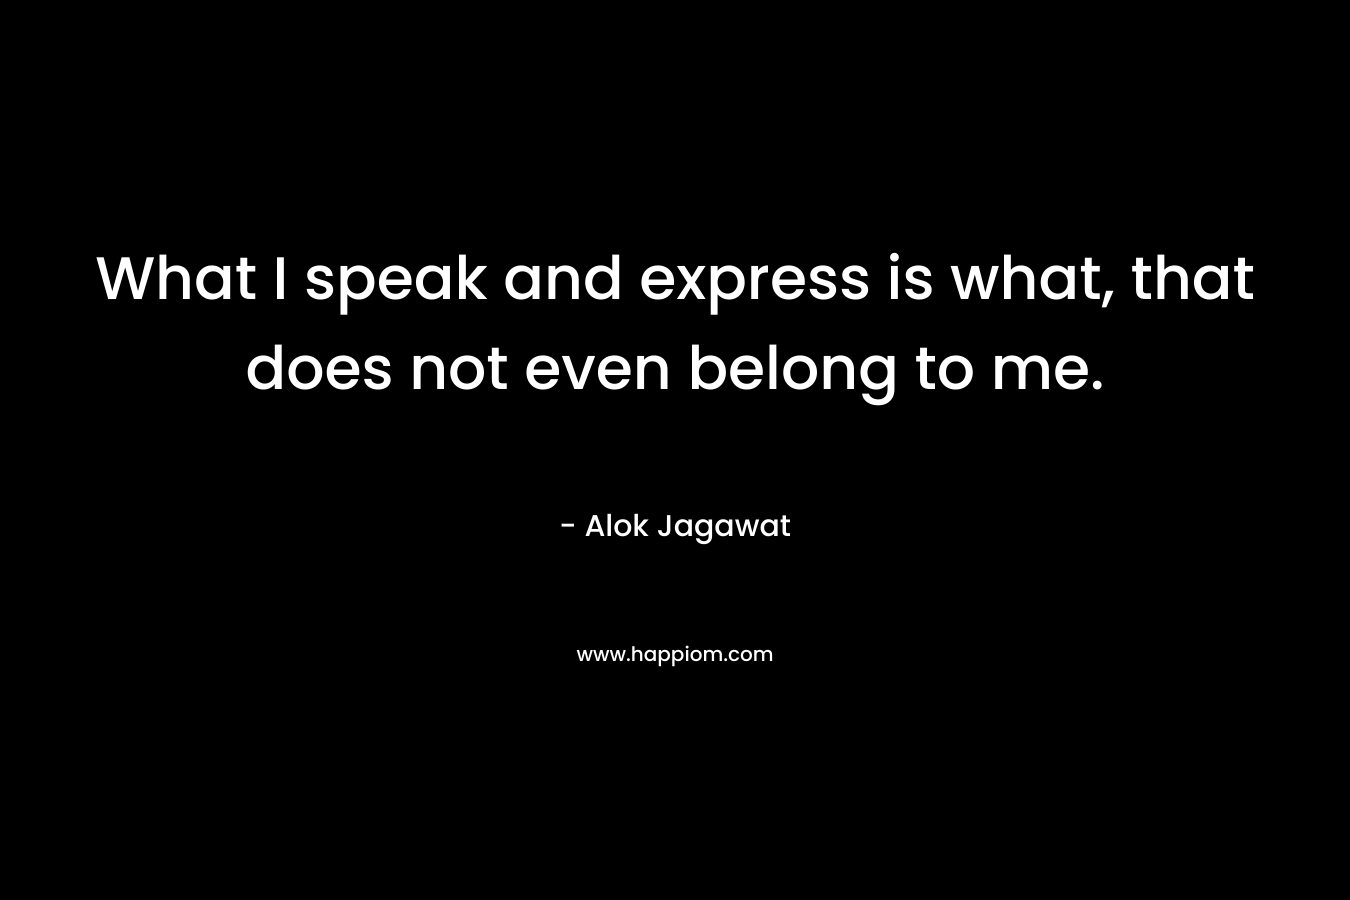 What I speak and express is what, that does not even belong to me. – Alok Jagawat